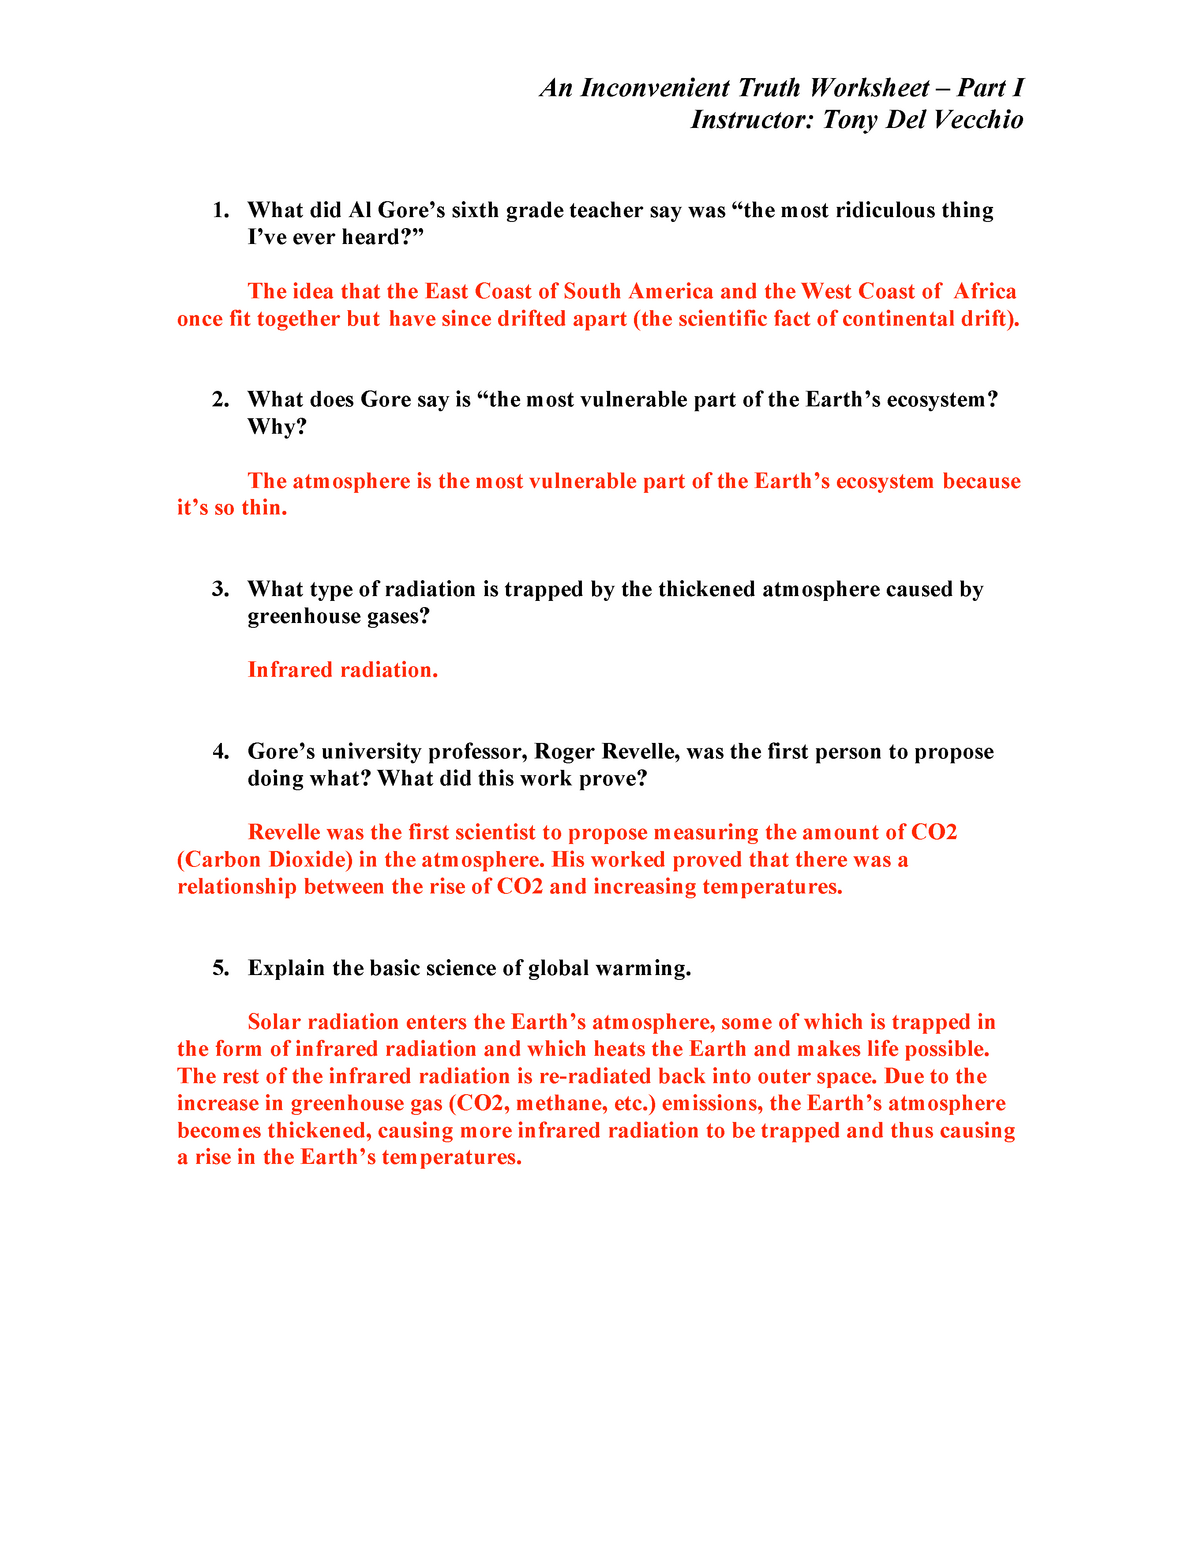 Ait worksheet answers part i - An Inconvenient Truth Worksheet Regarding Prufrock Analysis Worksheet Answers